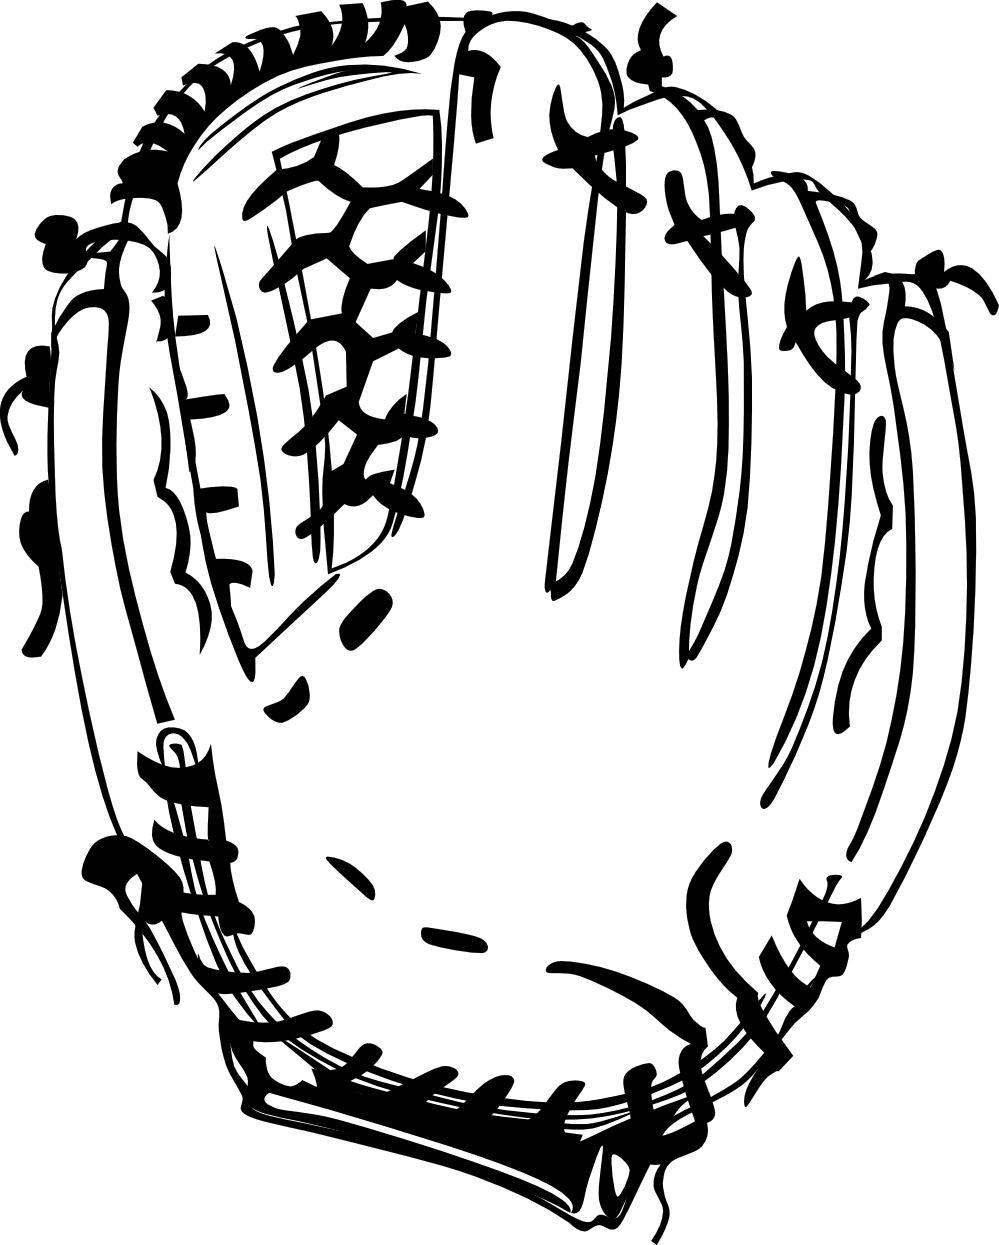 Free Baseball Glove Pictures, Download Free Clip Art, Free